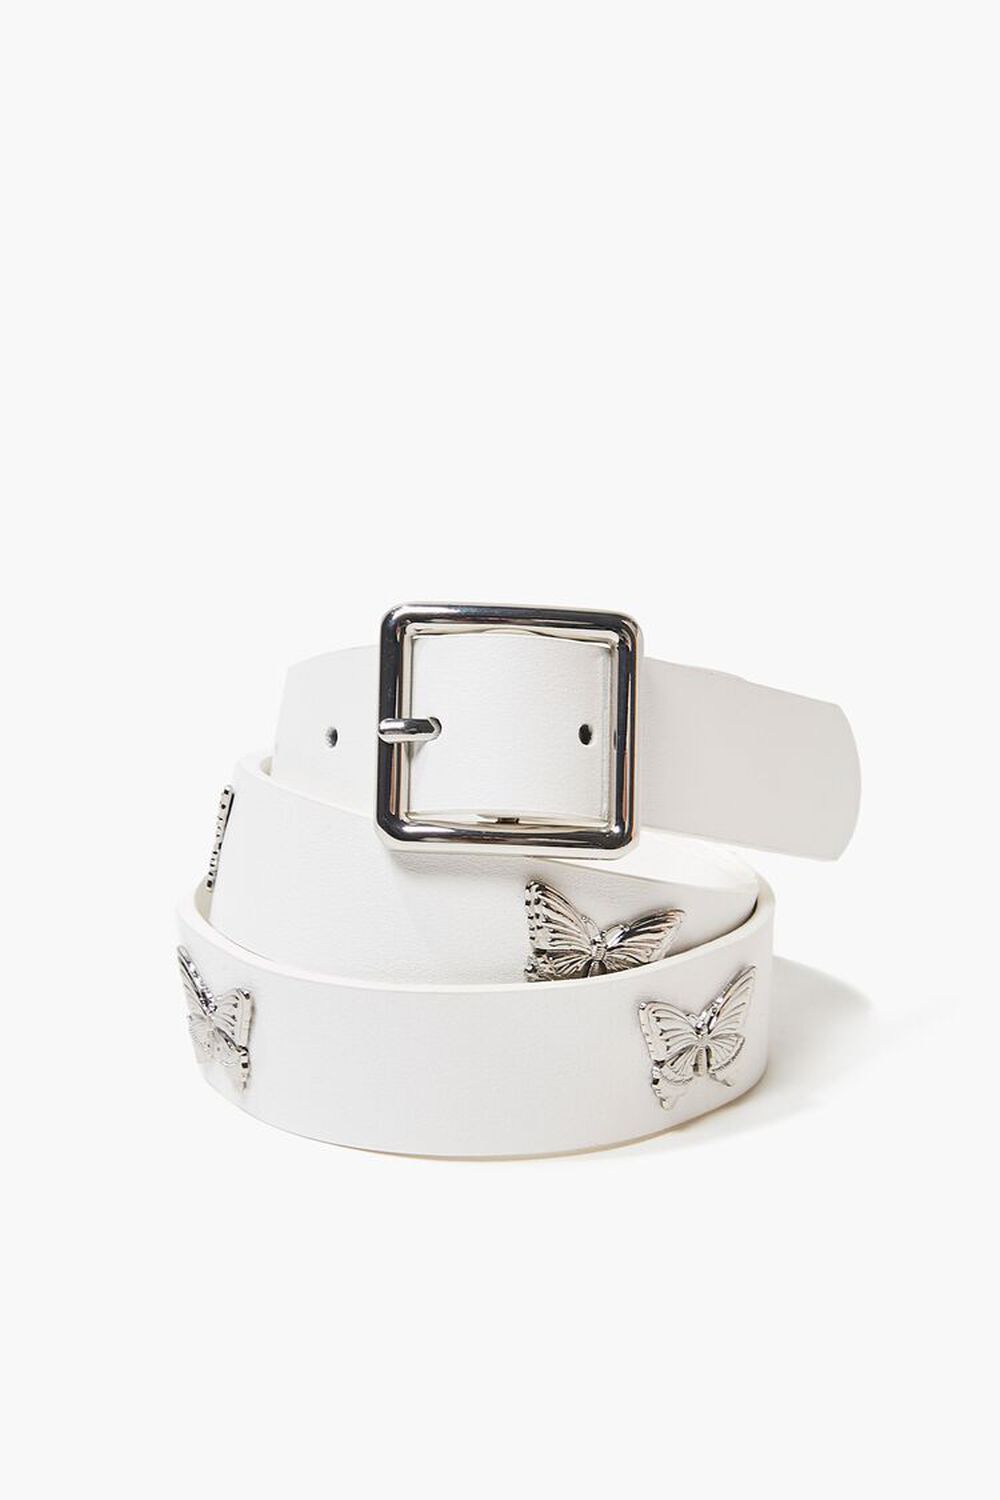 WHITE/SILVER Butterfly Hip Belt, image 1